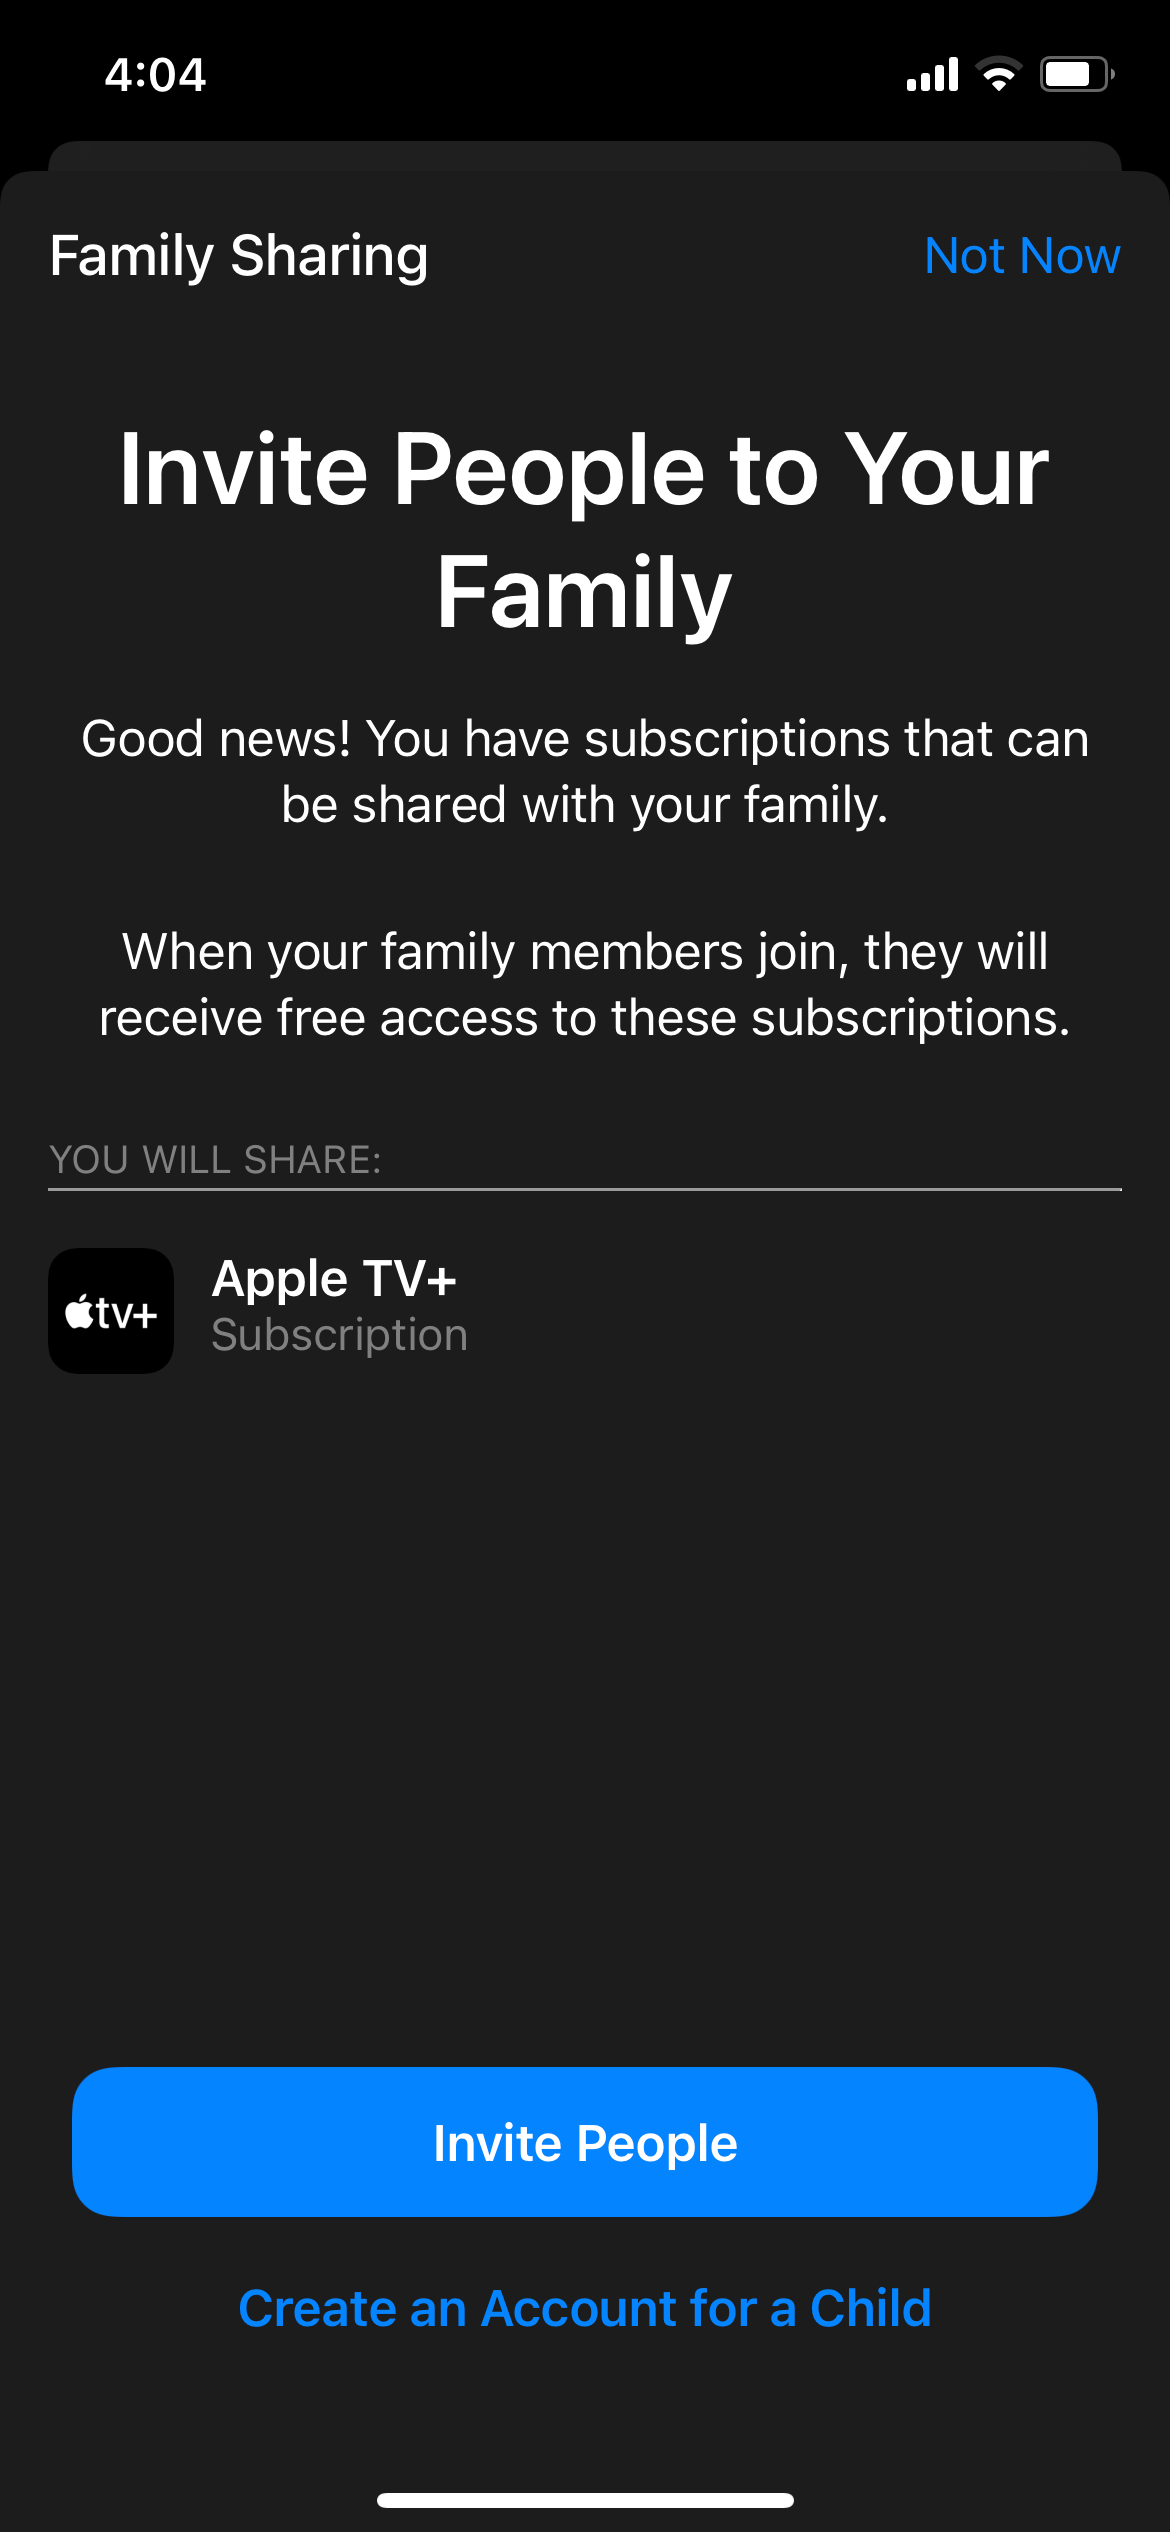 Family Sharing Option on iPhone to Invite Family Members